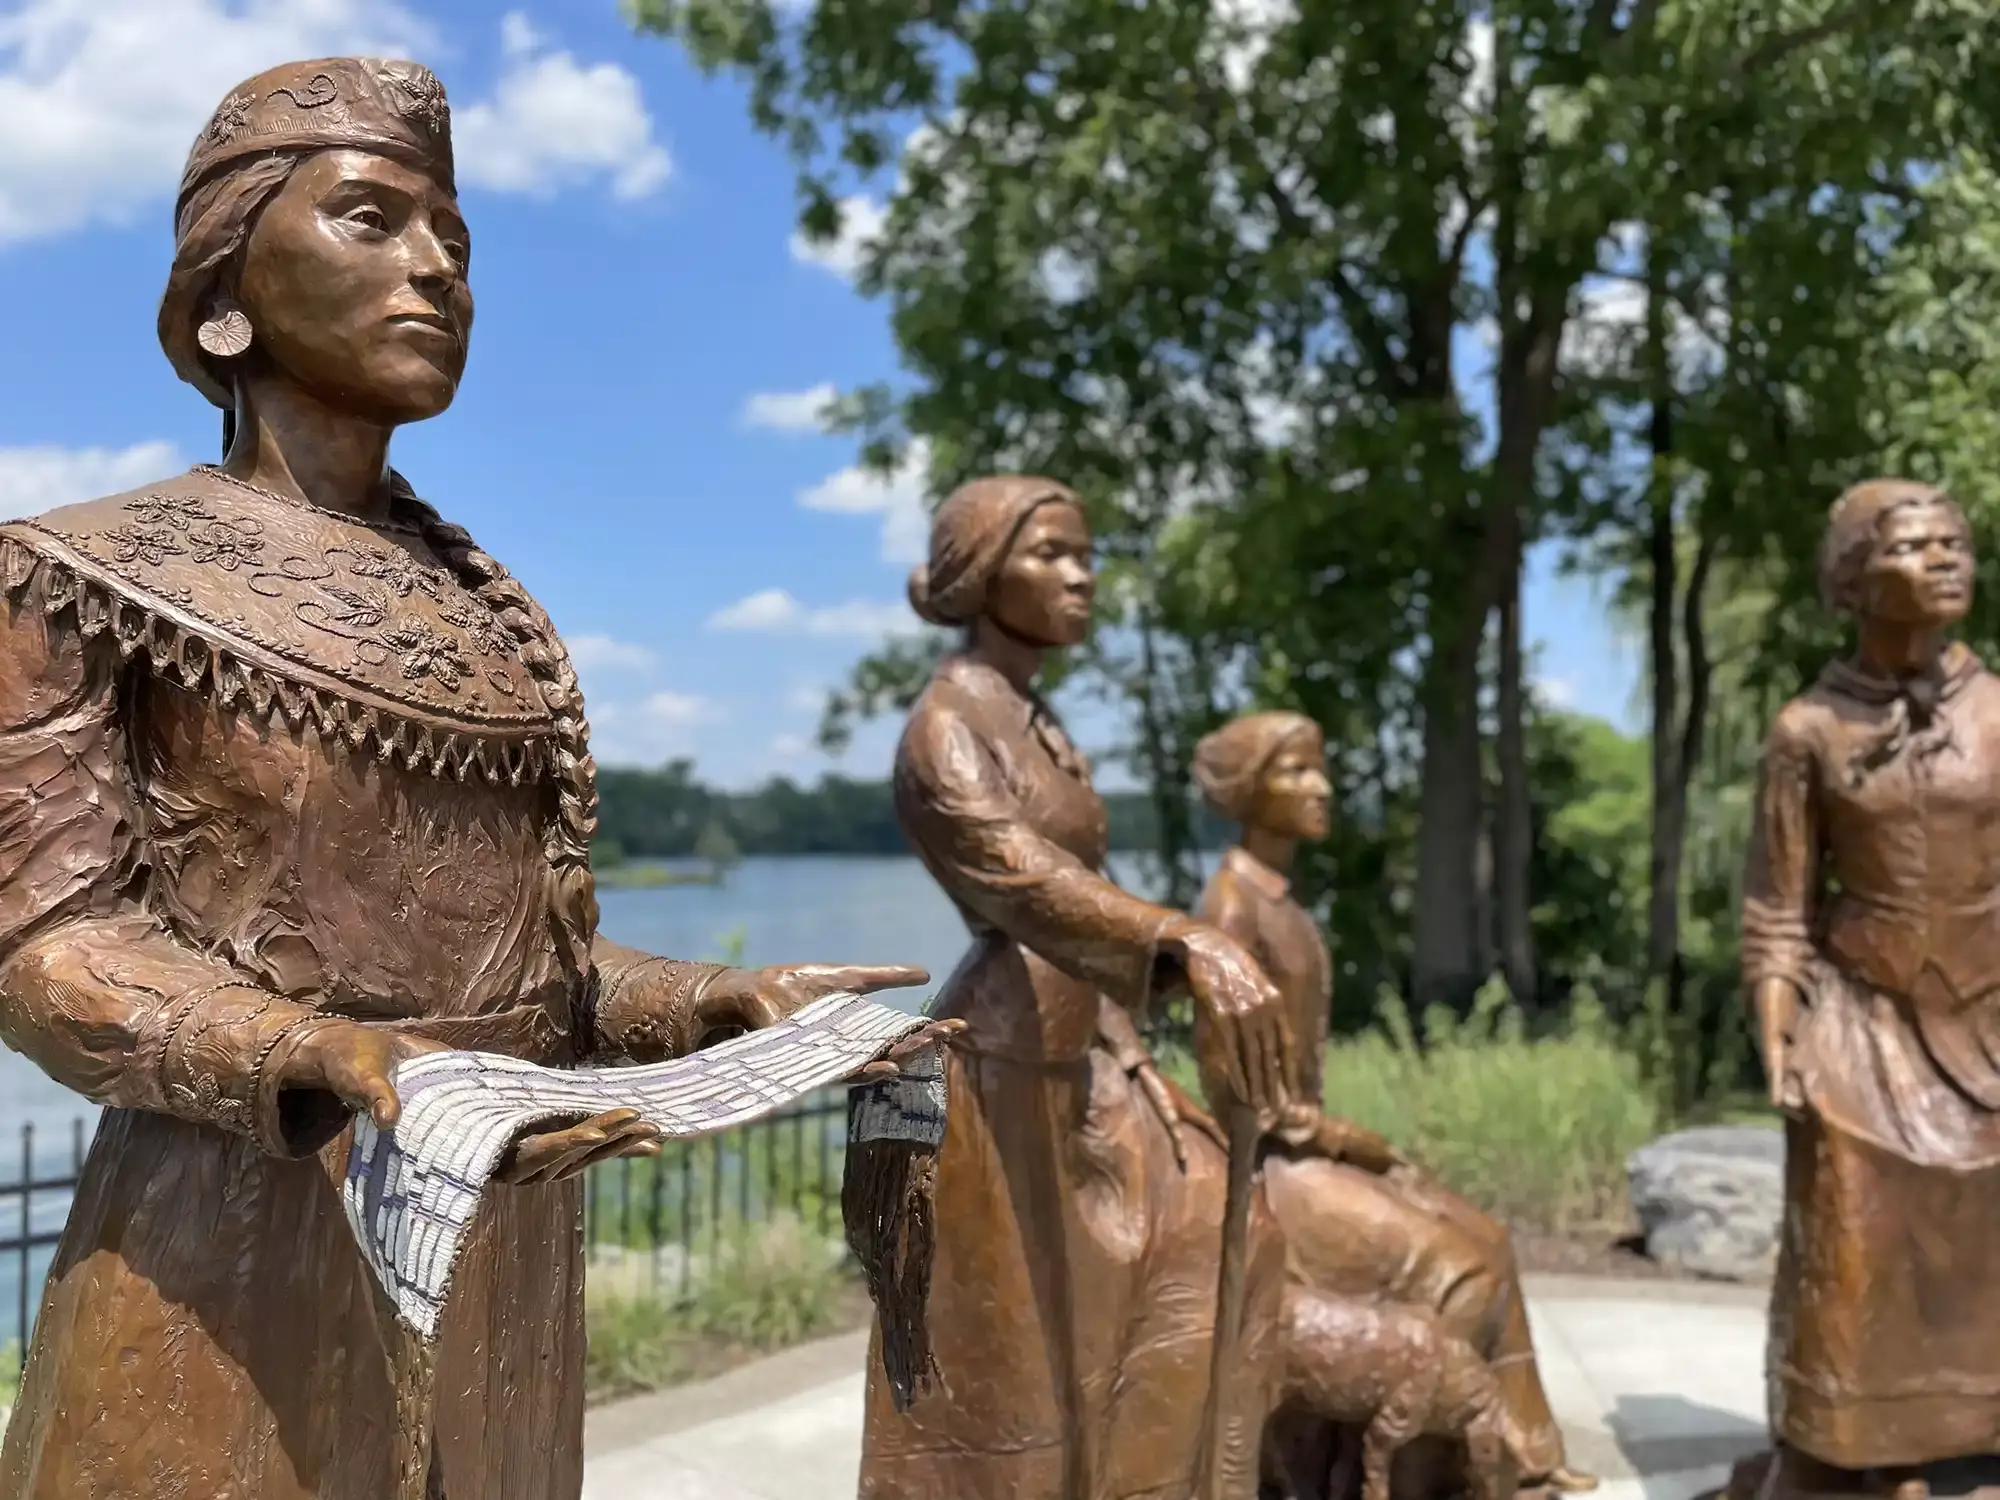 Ripples of Change Monument, Seneca Falls, NY commissioned by the U.S. Women's Suffrage Centennial Commission on the undertold contributions to Women's Suffrage. Laura Cornelius Kellogg (Oneida) stands holding the Haudenosaunee Women's Nomination Belt alongside Harriet Tubman, Martha Coffin Wright and Sojourner Truth.